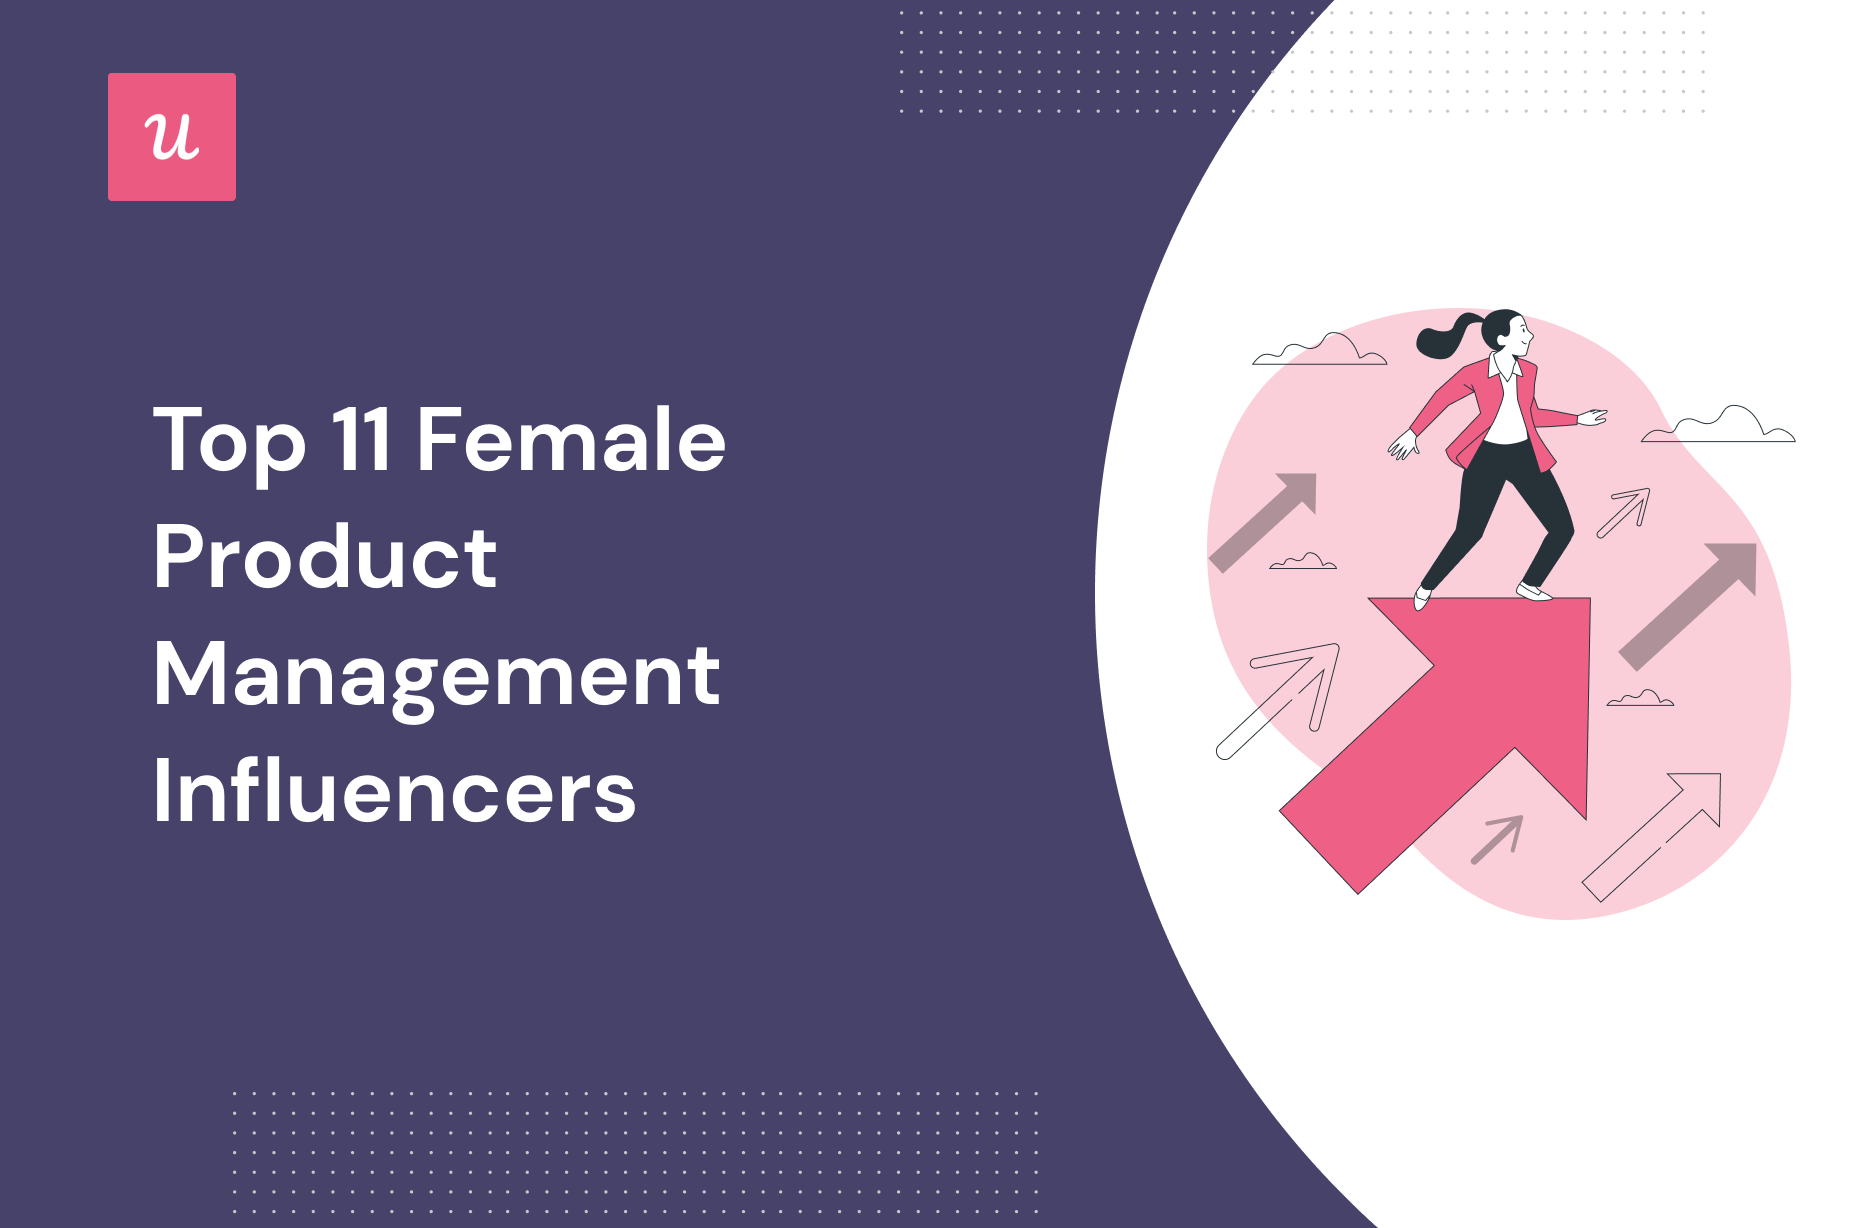 Top 11 Female Product Management Influencers